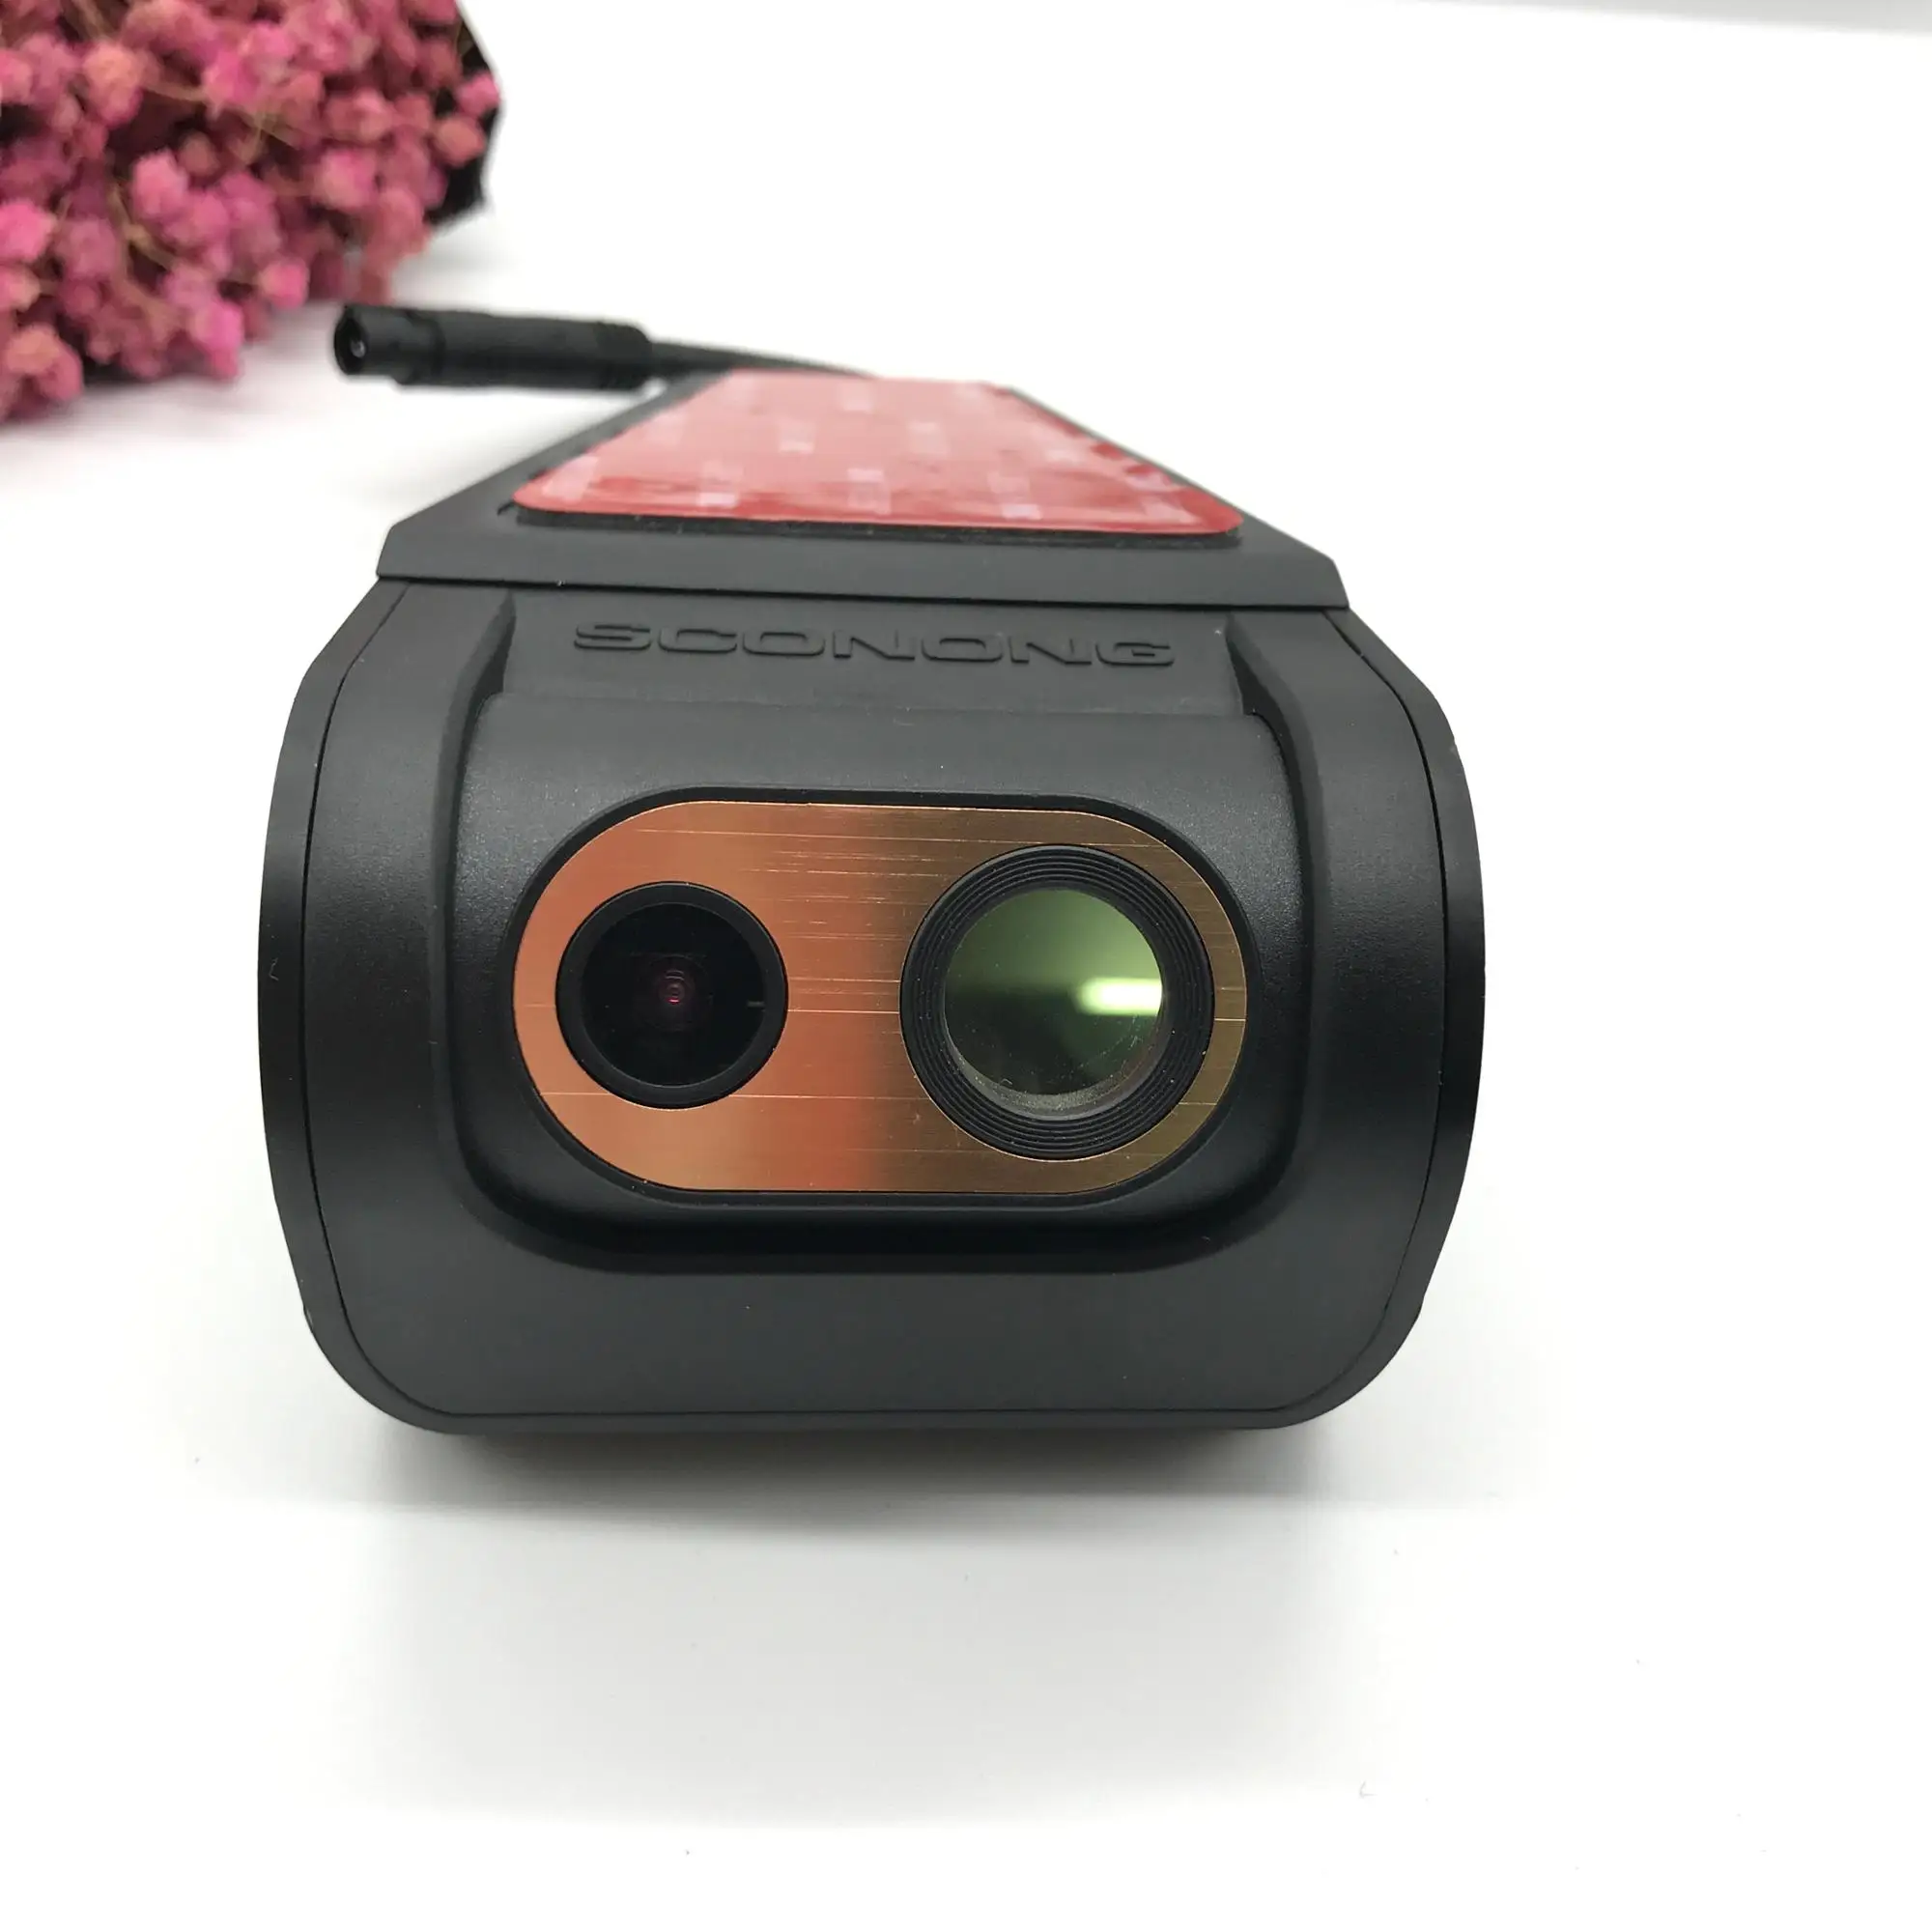 Yuxunion-Foggy Condition Automotive Thermal Imaging Cam with Night Vision Vehicle Dashboard Camera